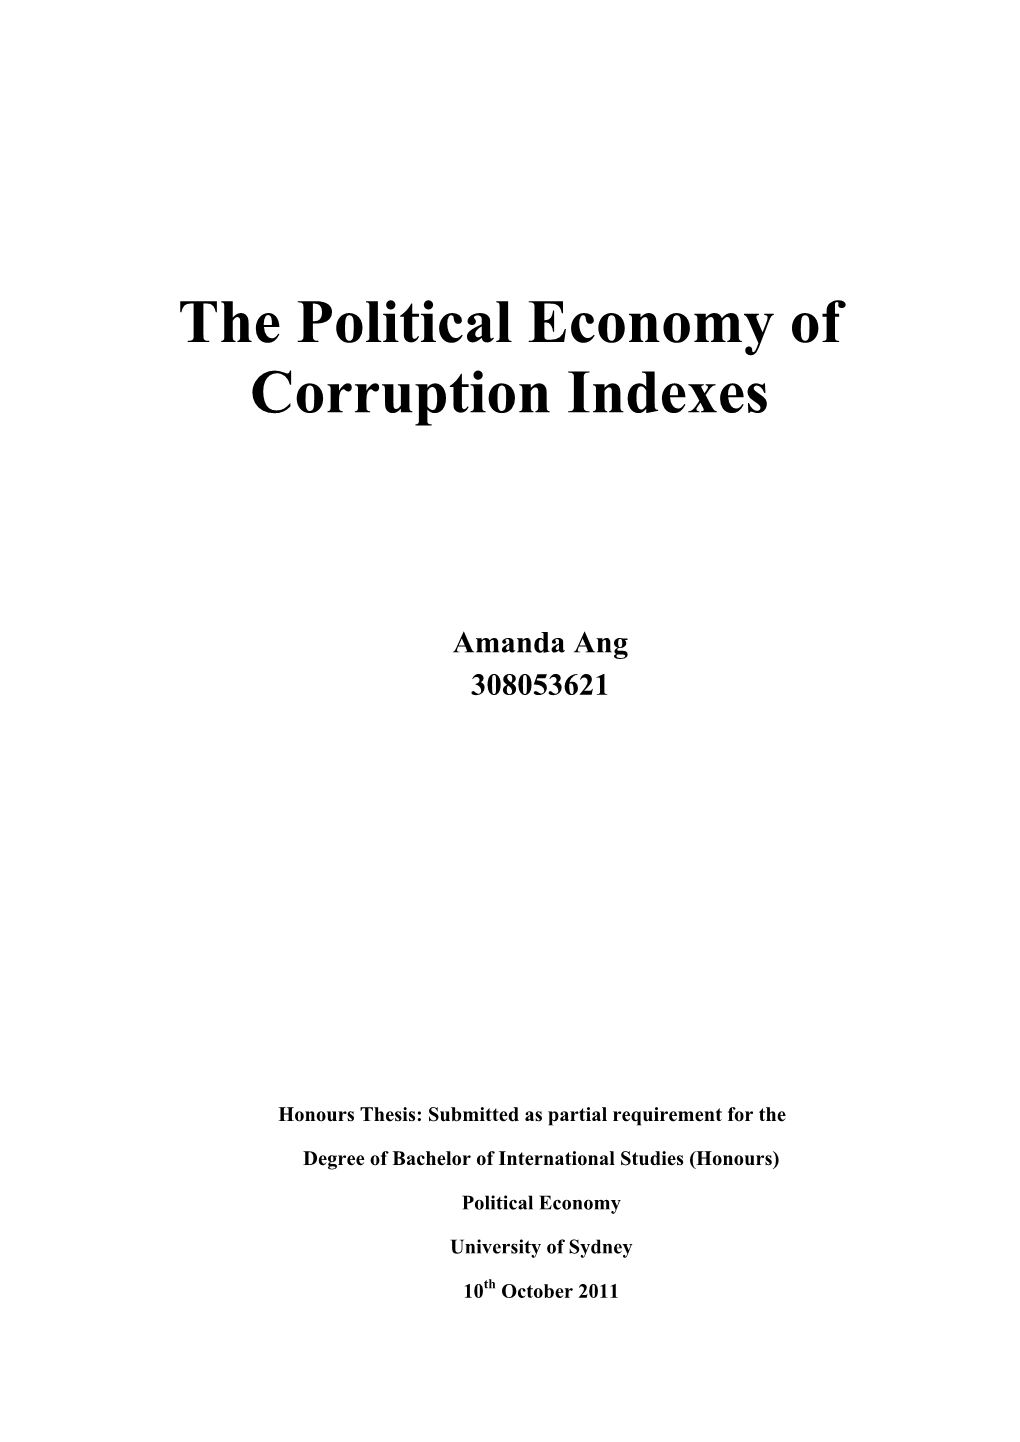 The Political Economy of Corruption Indexes